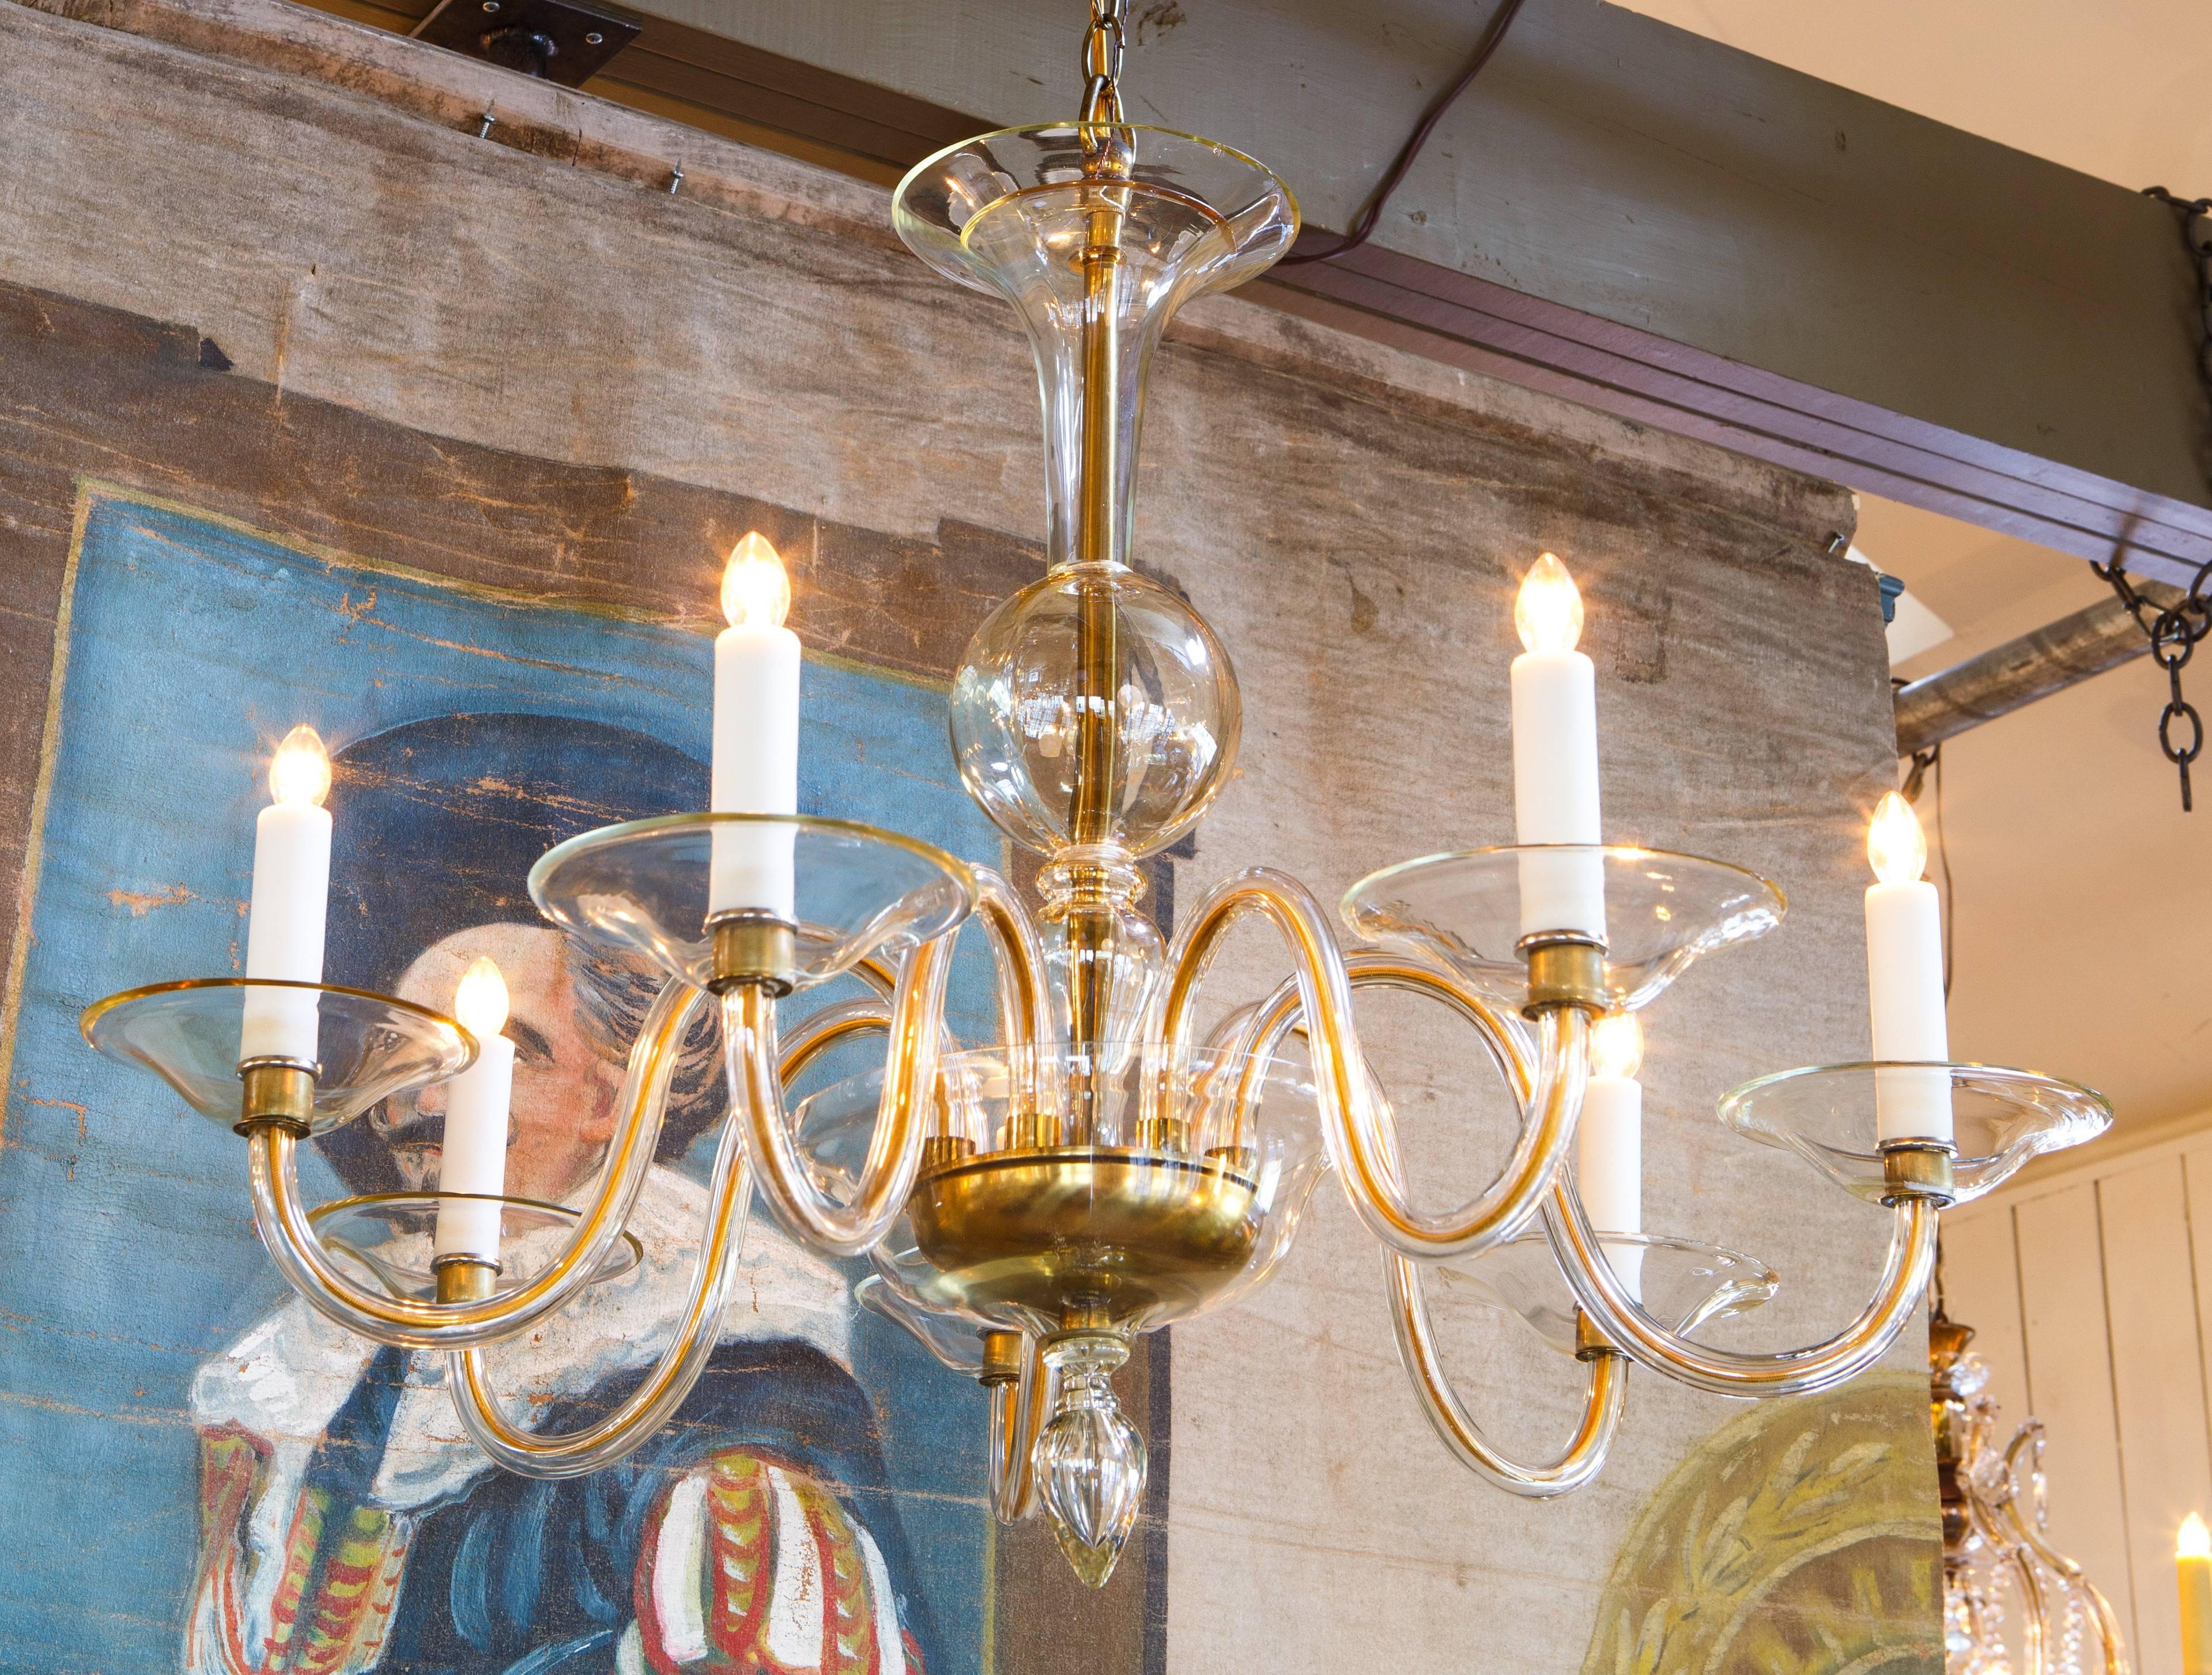 Pair of champagne colored blown glass chandeliers from Murano, Italy. Beautiful shape and proportion with centre ball in the post and blown glass finial at the base. Newly wired with all UL listed parts and seven candelabra sockets per fixture.